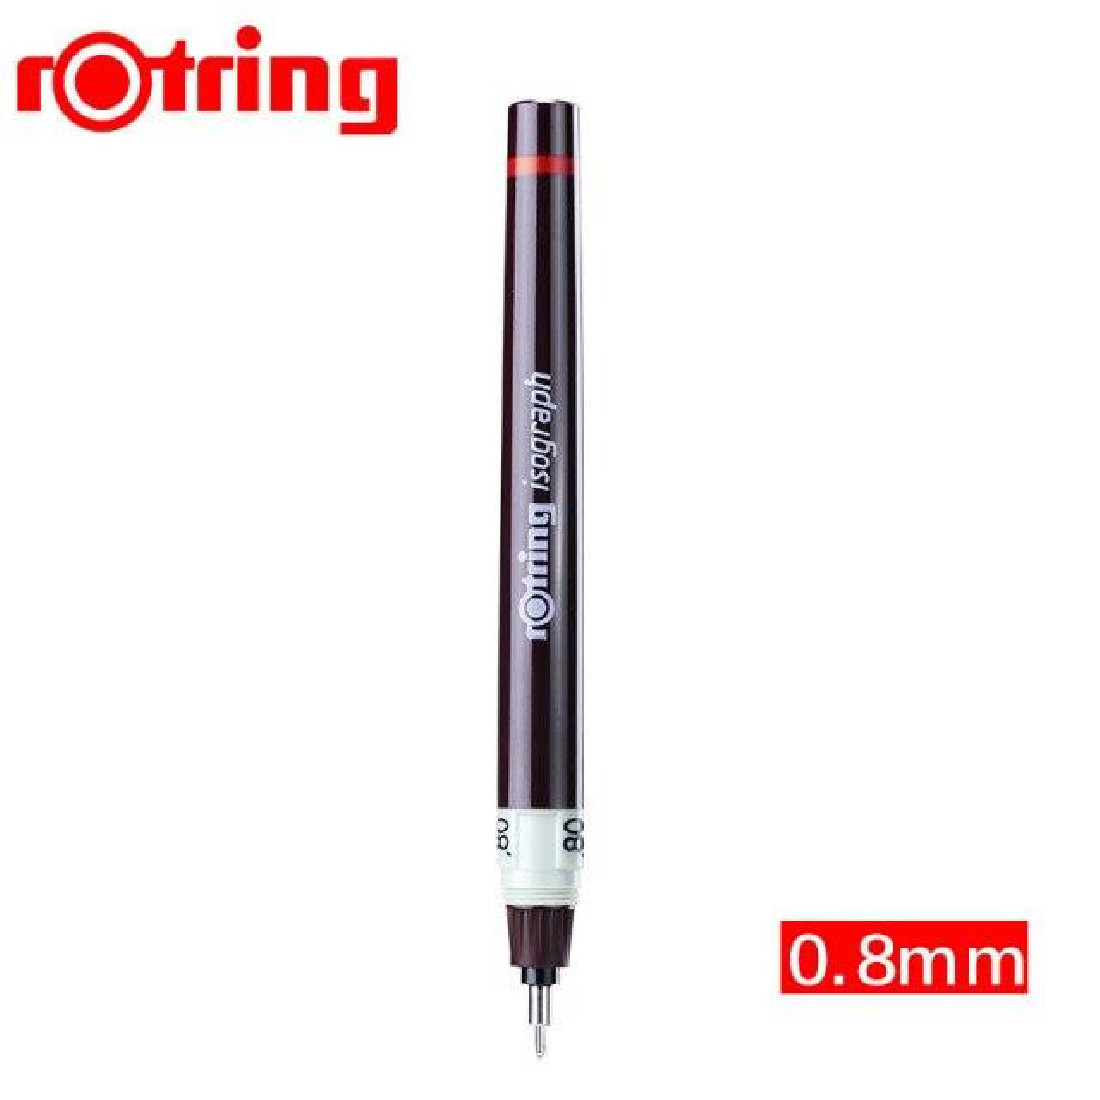 Rotring Isograph pen 0,8mm